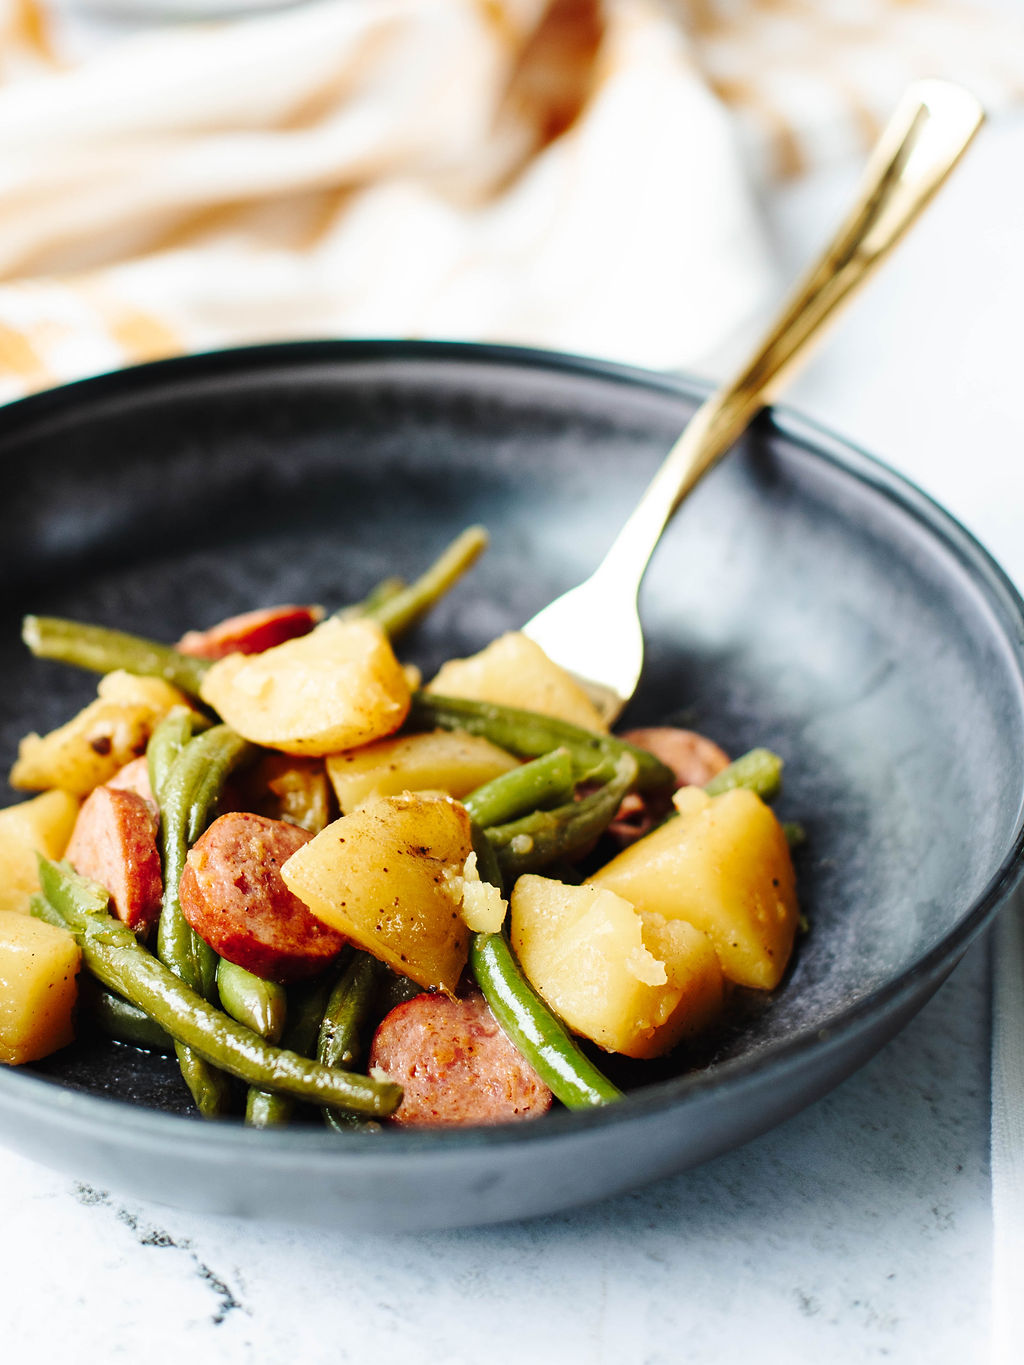 a serving of Cajun sausage, potatoes, and green beans on a dinner plate.